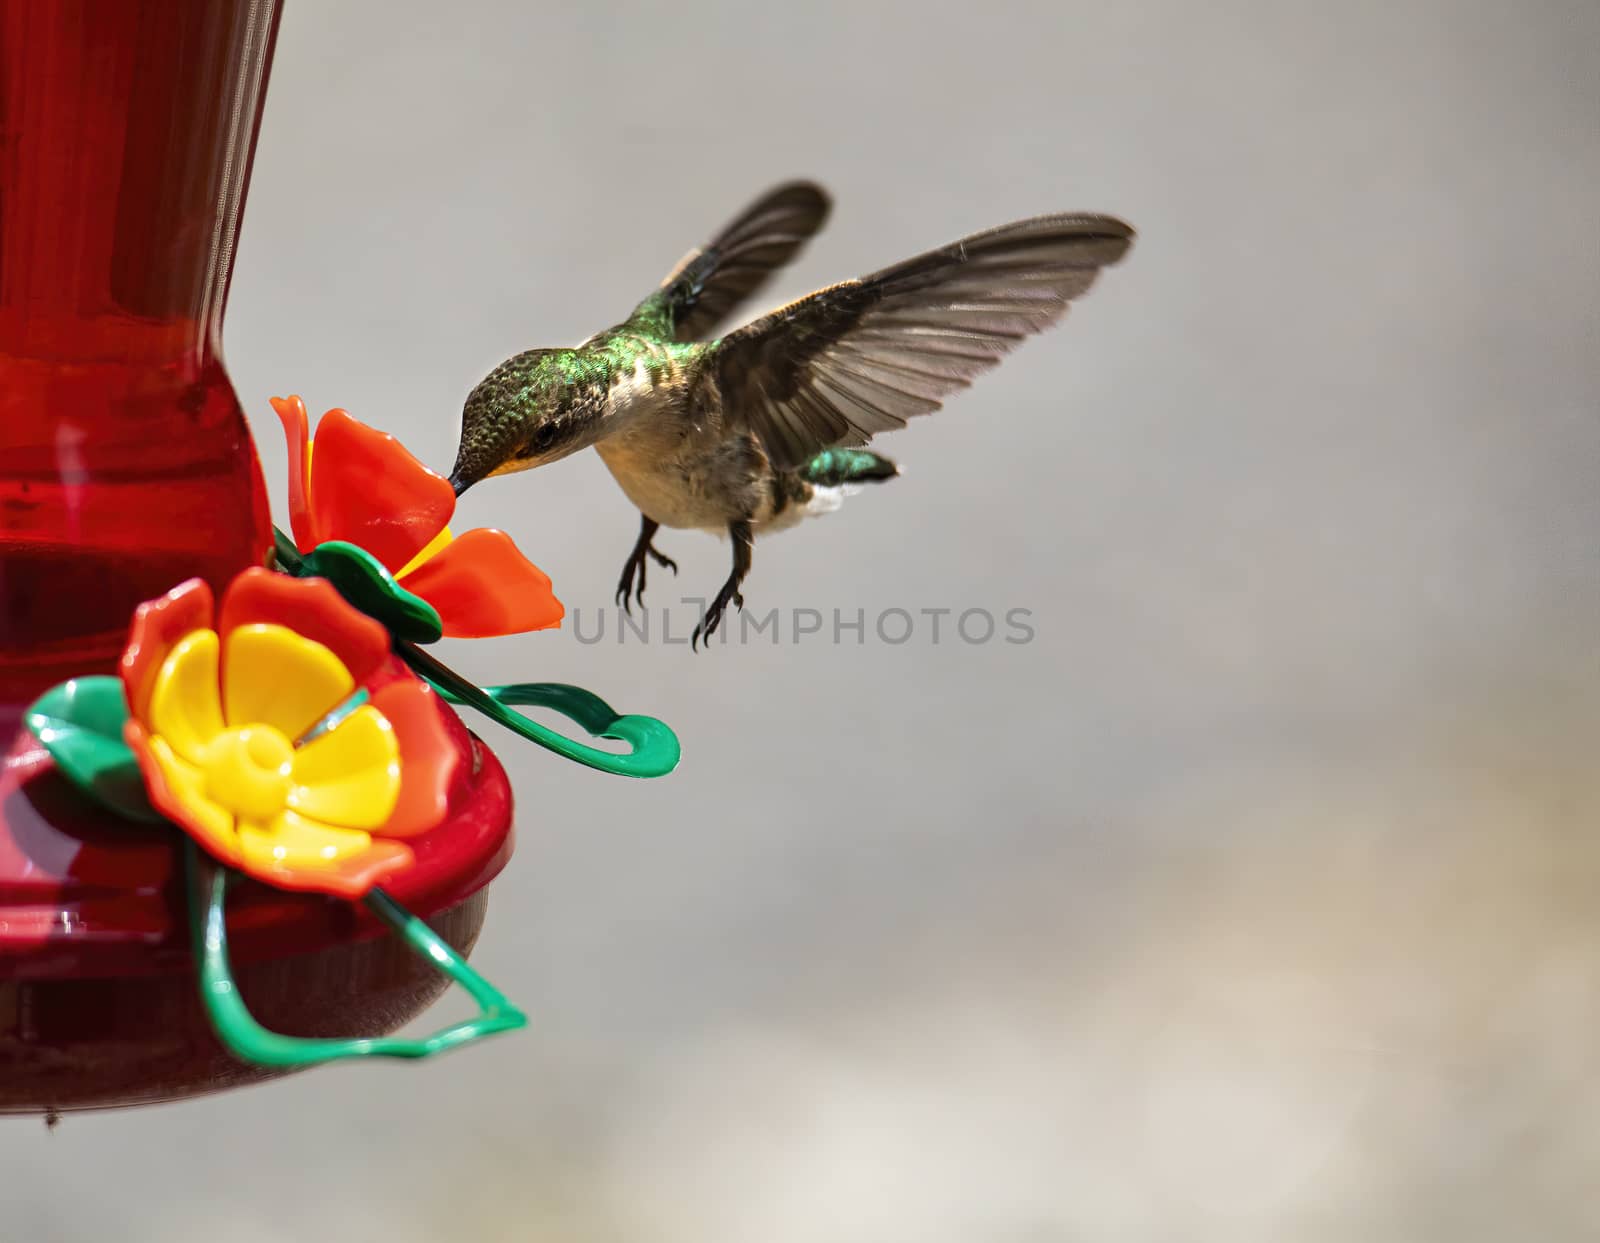 Hummingbird Feeds While Hovering by CharlieFloyd